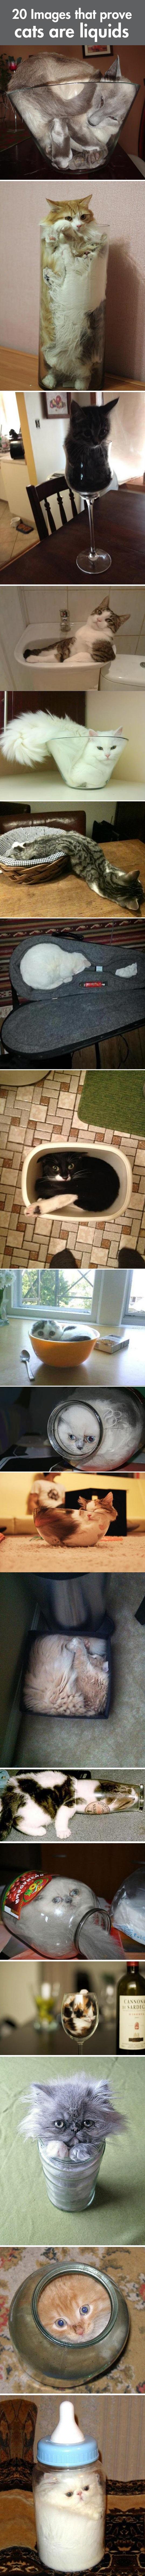 Definitive Proof That Cats Are Basically Liquids... -   Misc